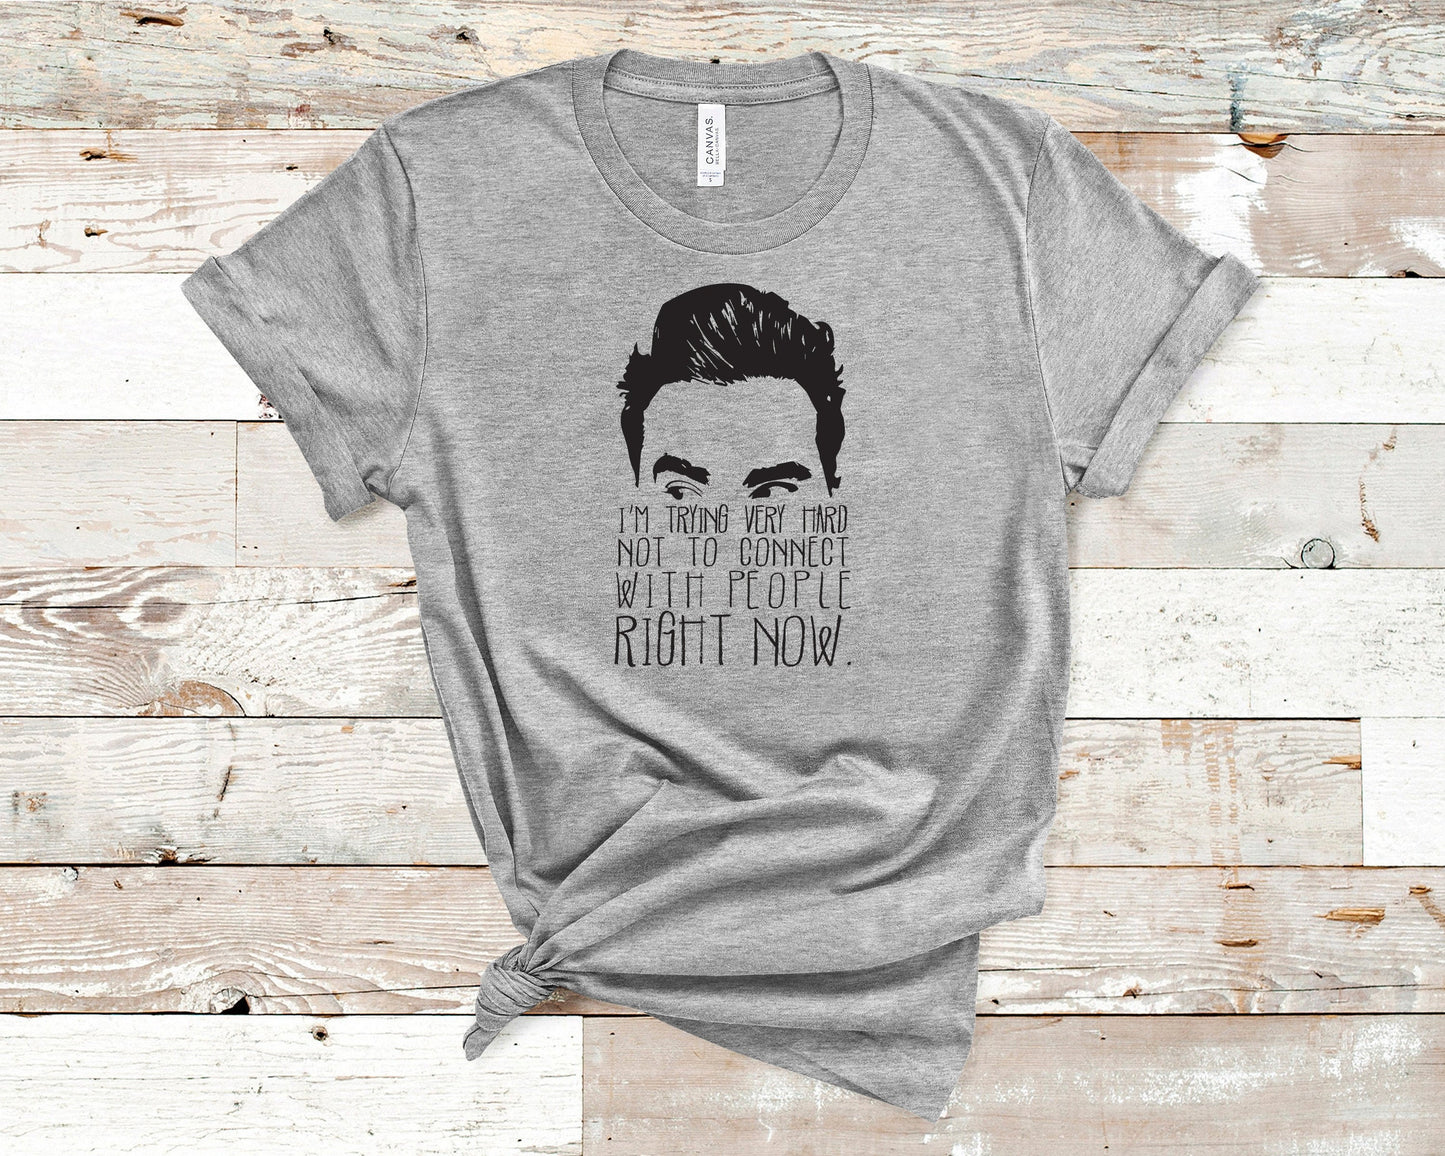 David Rose- I’m trying very hard not to connect with people right now- Adult T-shirt- Unisex Adults